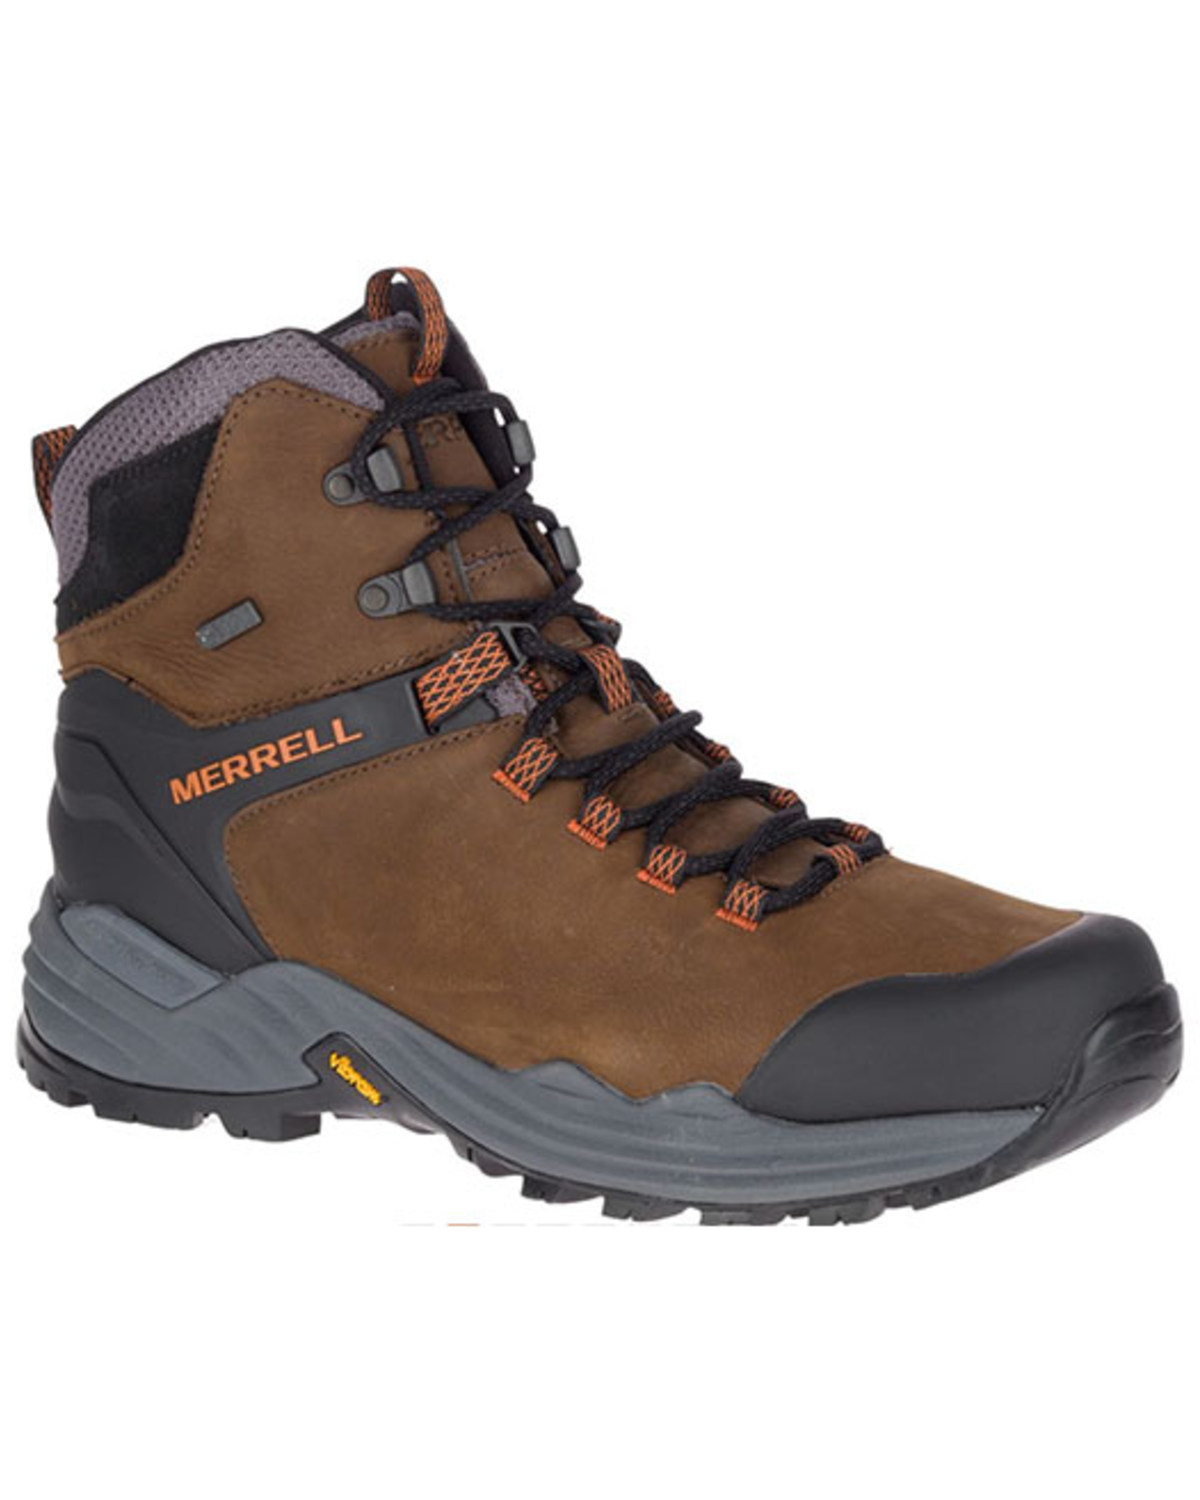 Merrell Men's Phaserbound Waterproof Hiking Boots - Soft Toe